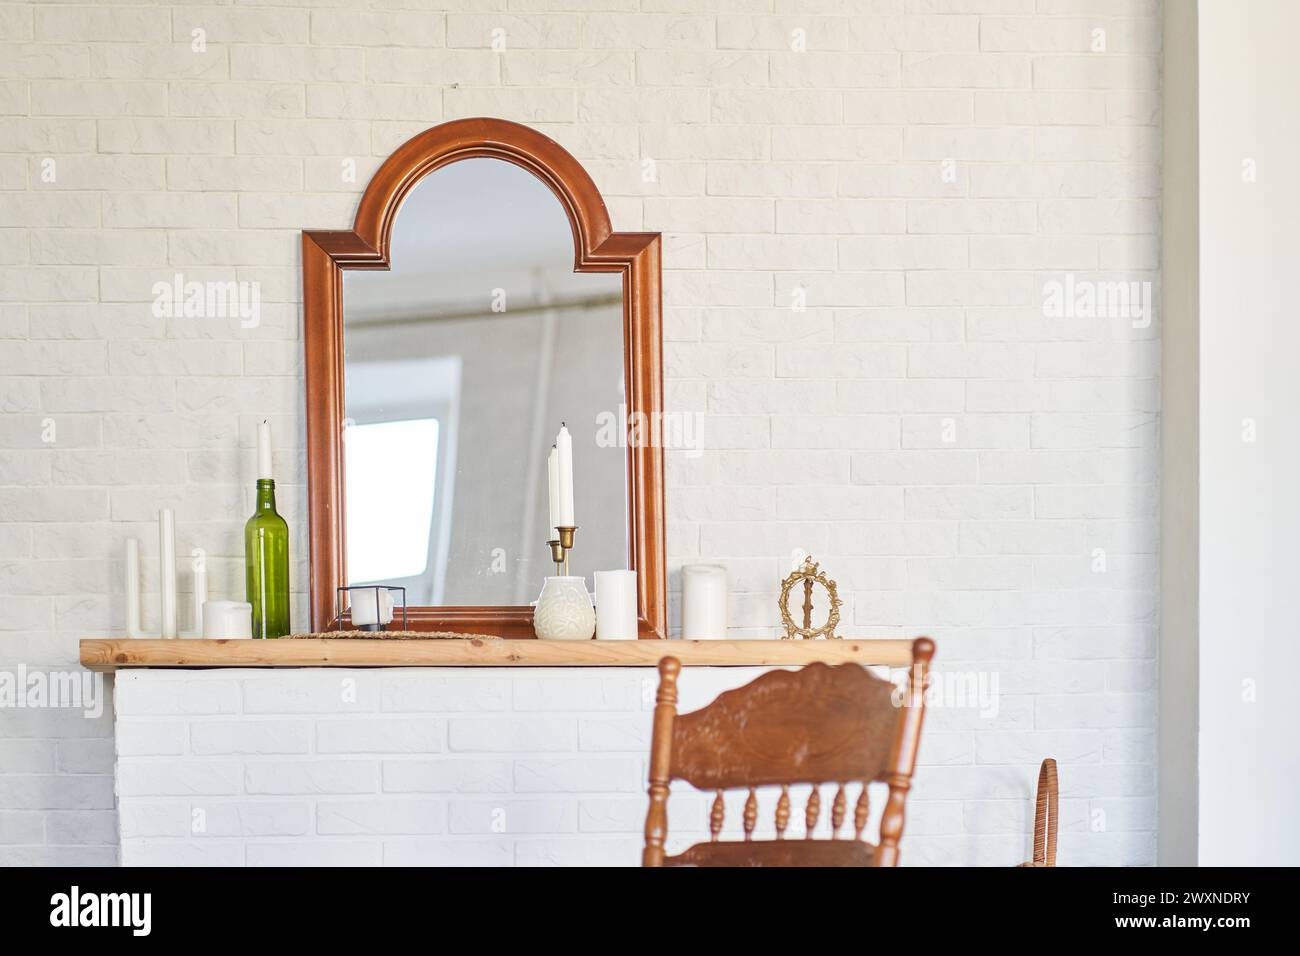 Interior design of room with vintage mirrow, fireplace, candles, bottle, chair, white brick wall. Background with copy space, empty. Template, mock up for your design, poster, art, picture. Stock Photo